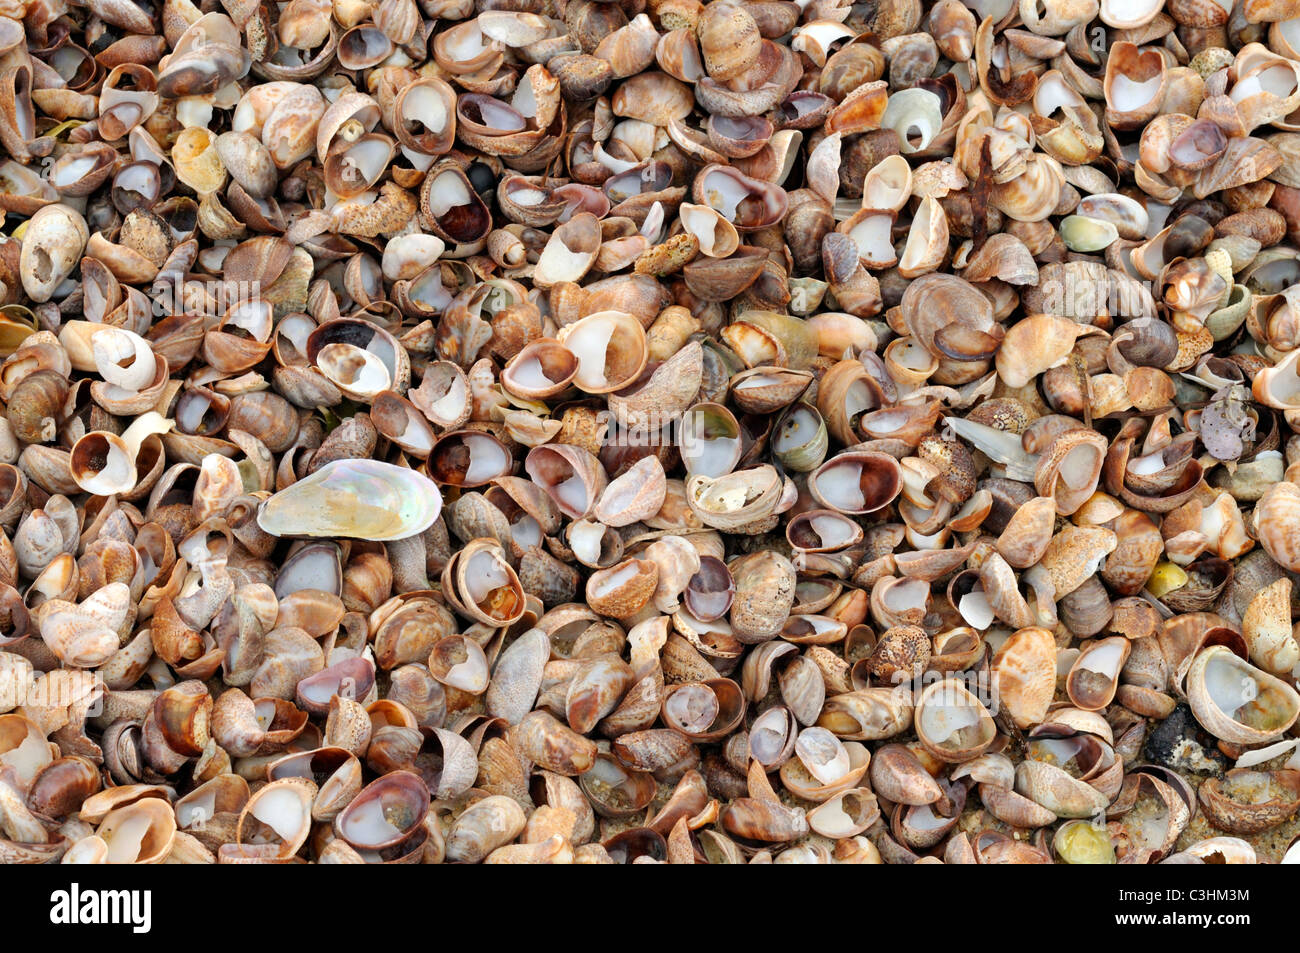 Detailed view of lots and lots of seashells washed ashore on  sandy Cape Cod beach, USA Stock Photo